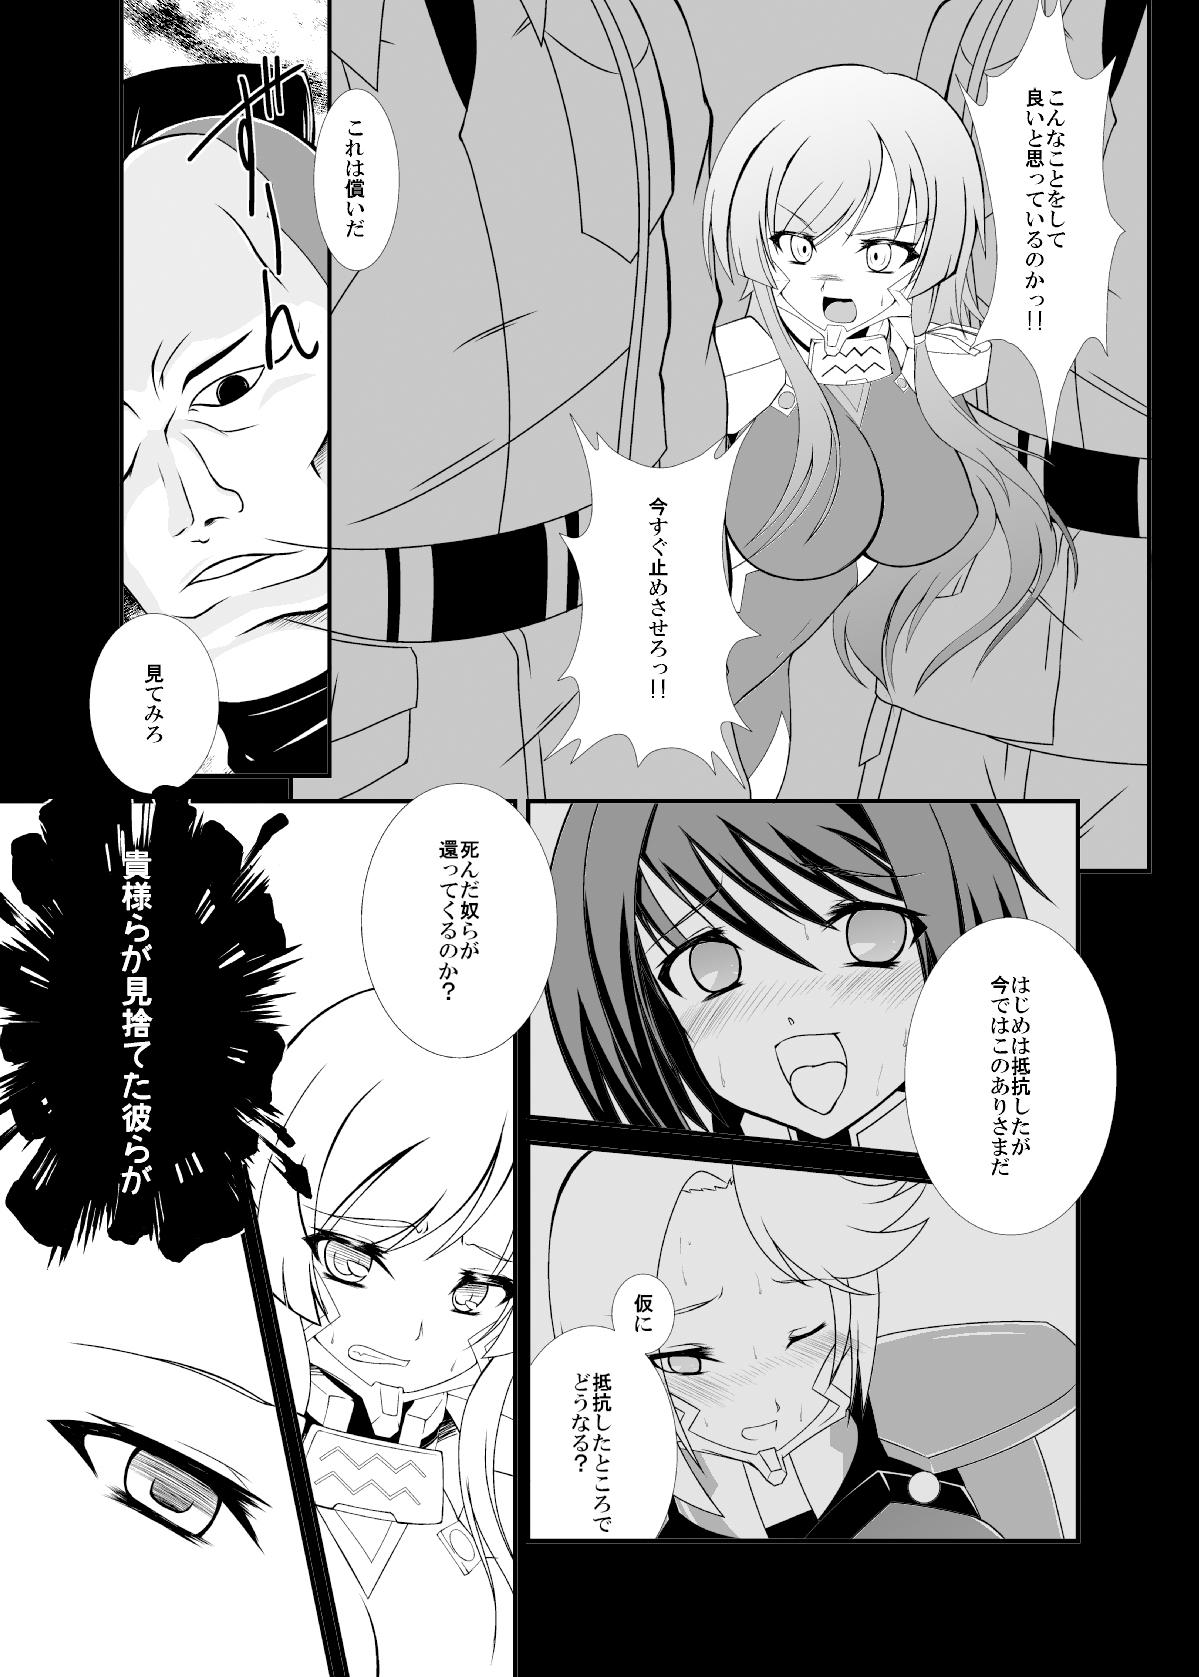 Interracial Sex KDT - Muv-luv alternative total eclipse Yoga - Page 4